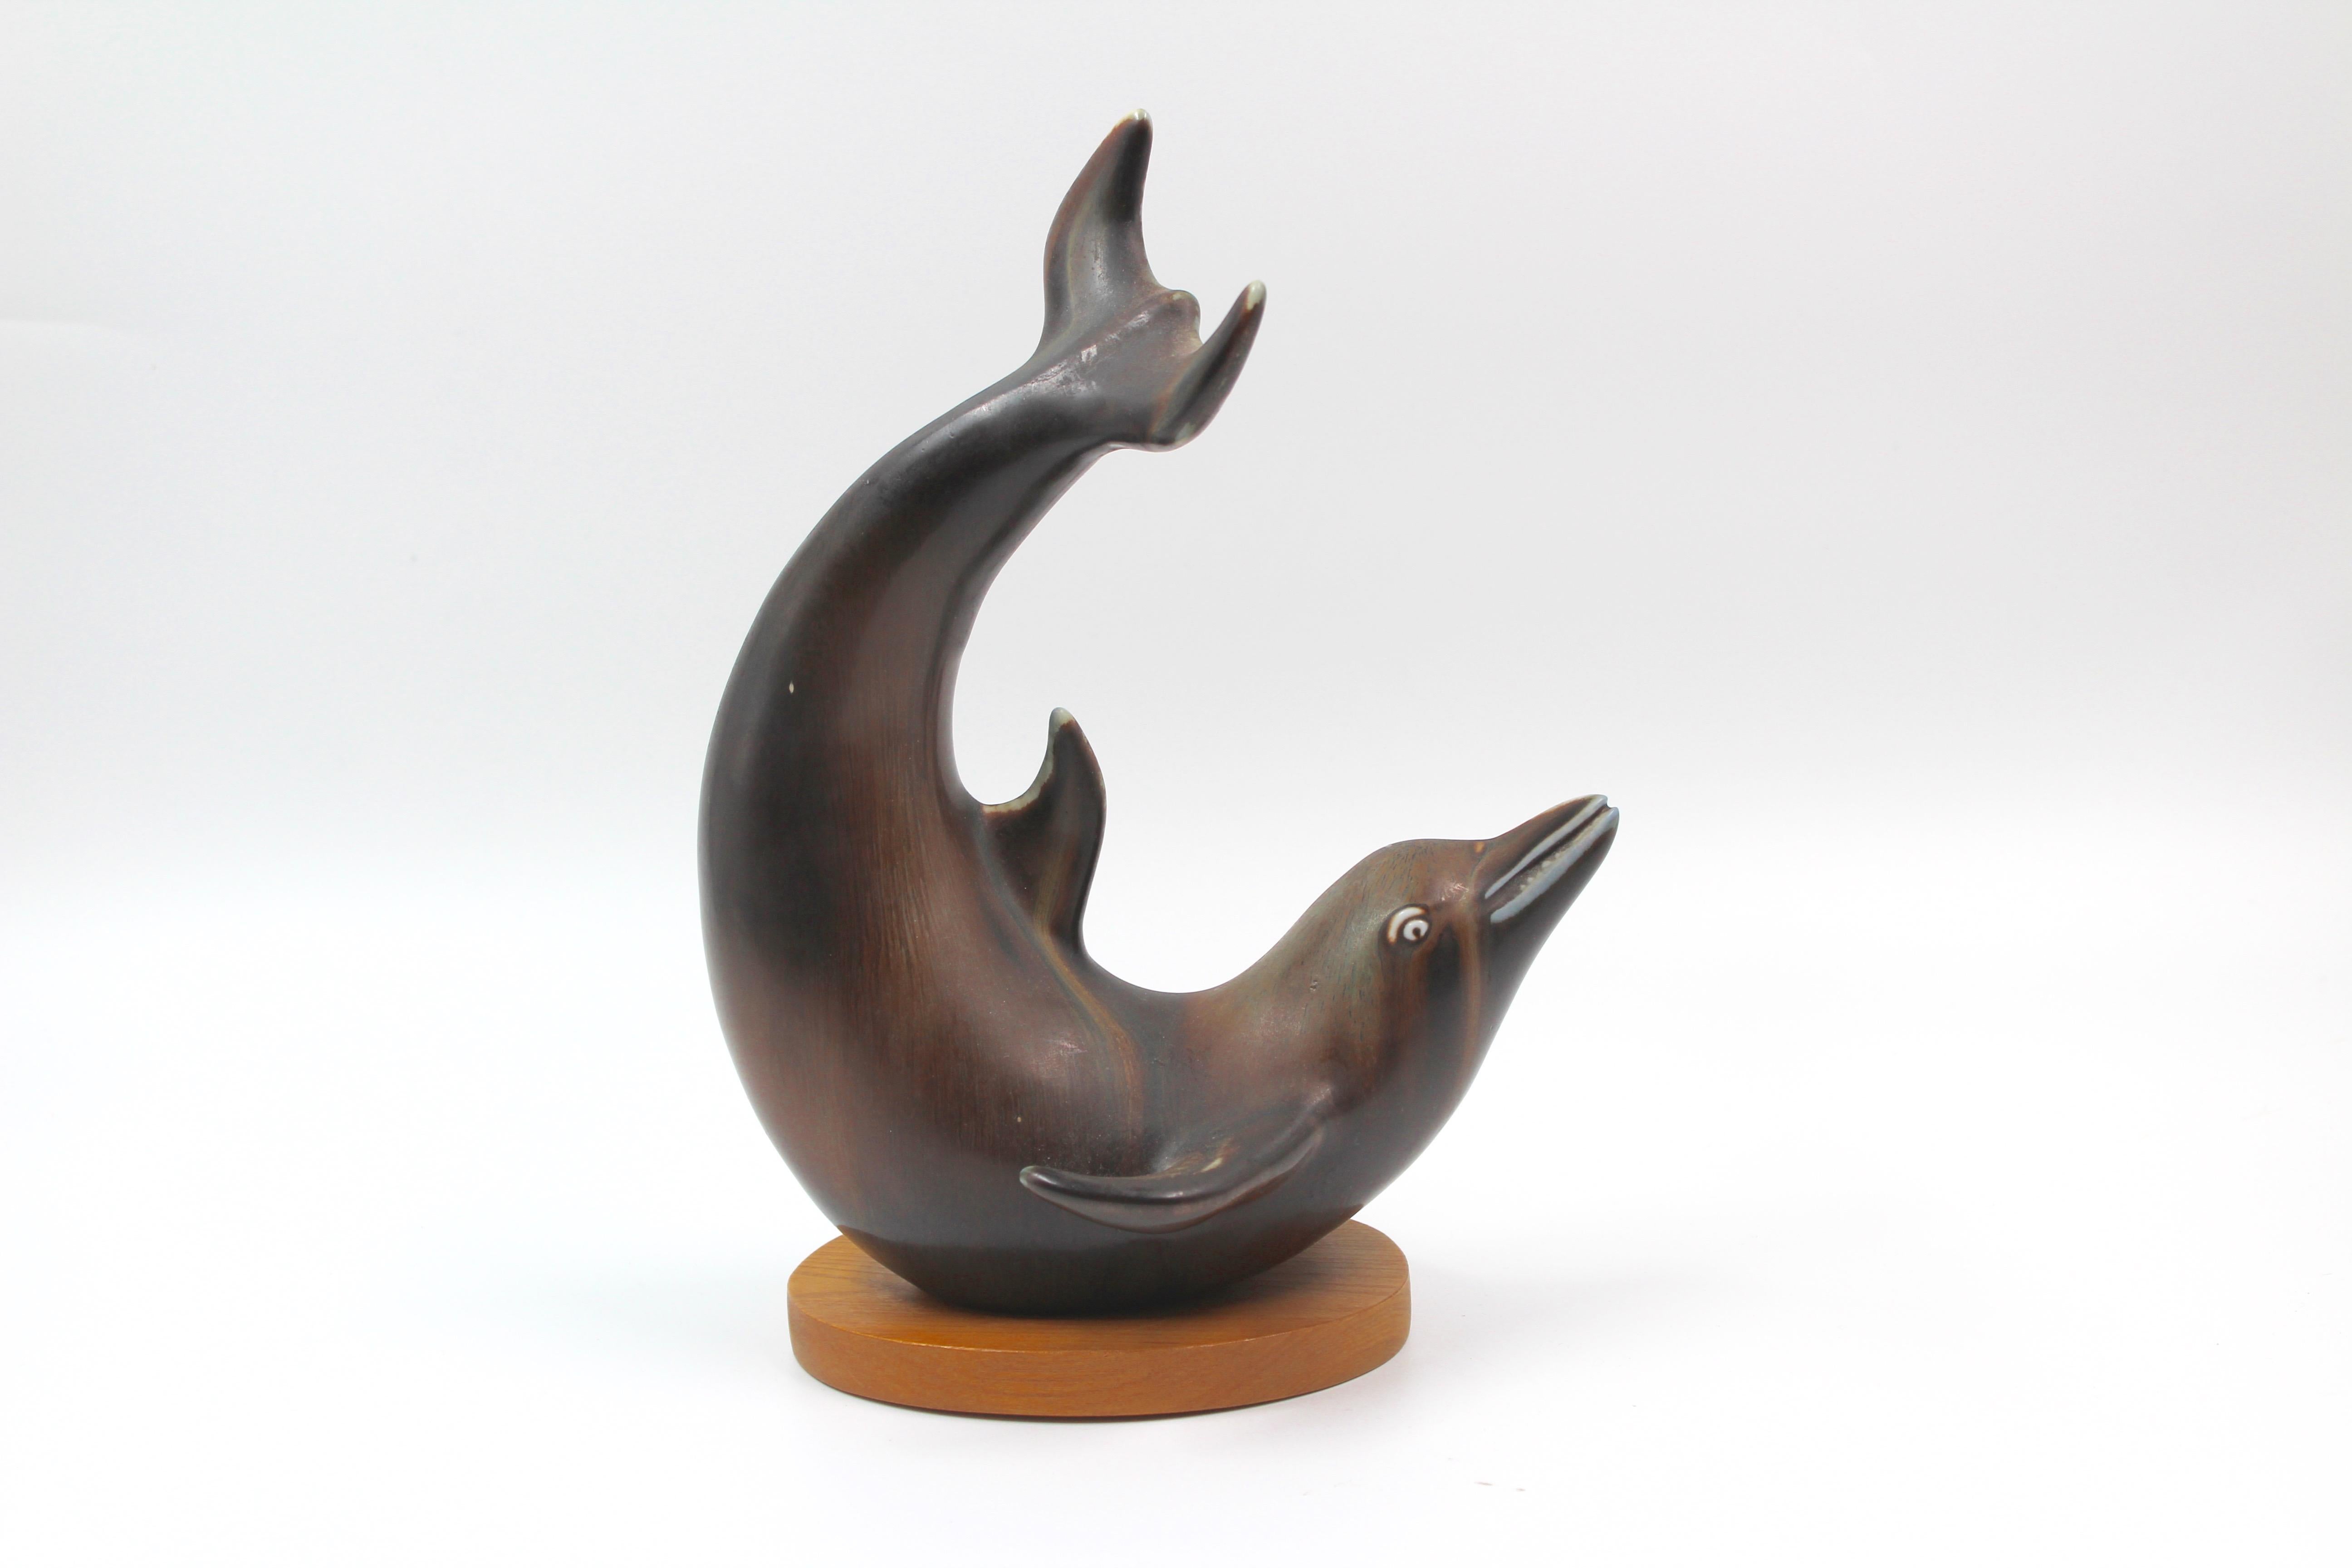 A very decorative ceramic dolphin with beautiful glaze, designed by Gunnar Nylund in the 1950s and produced by Rörstrand. The piece comes with the original wood plate and is in excellent condition.